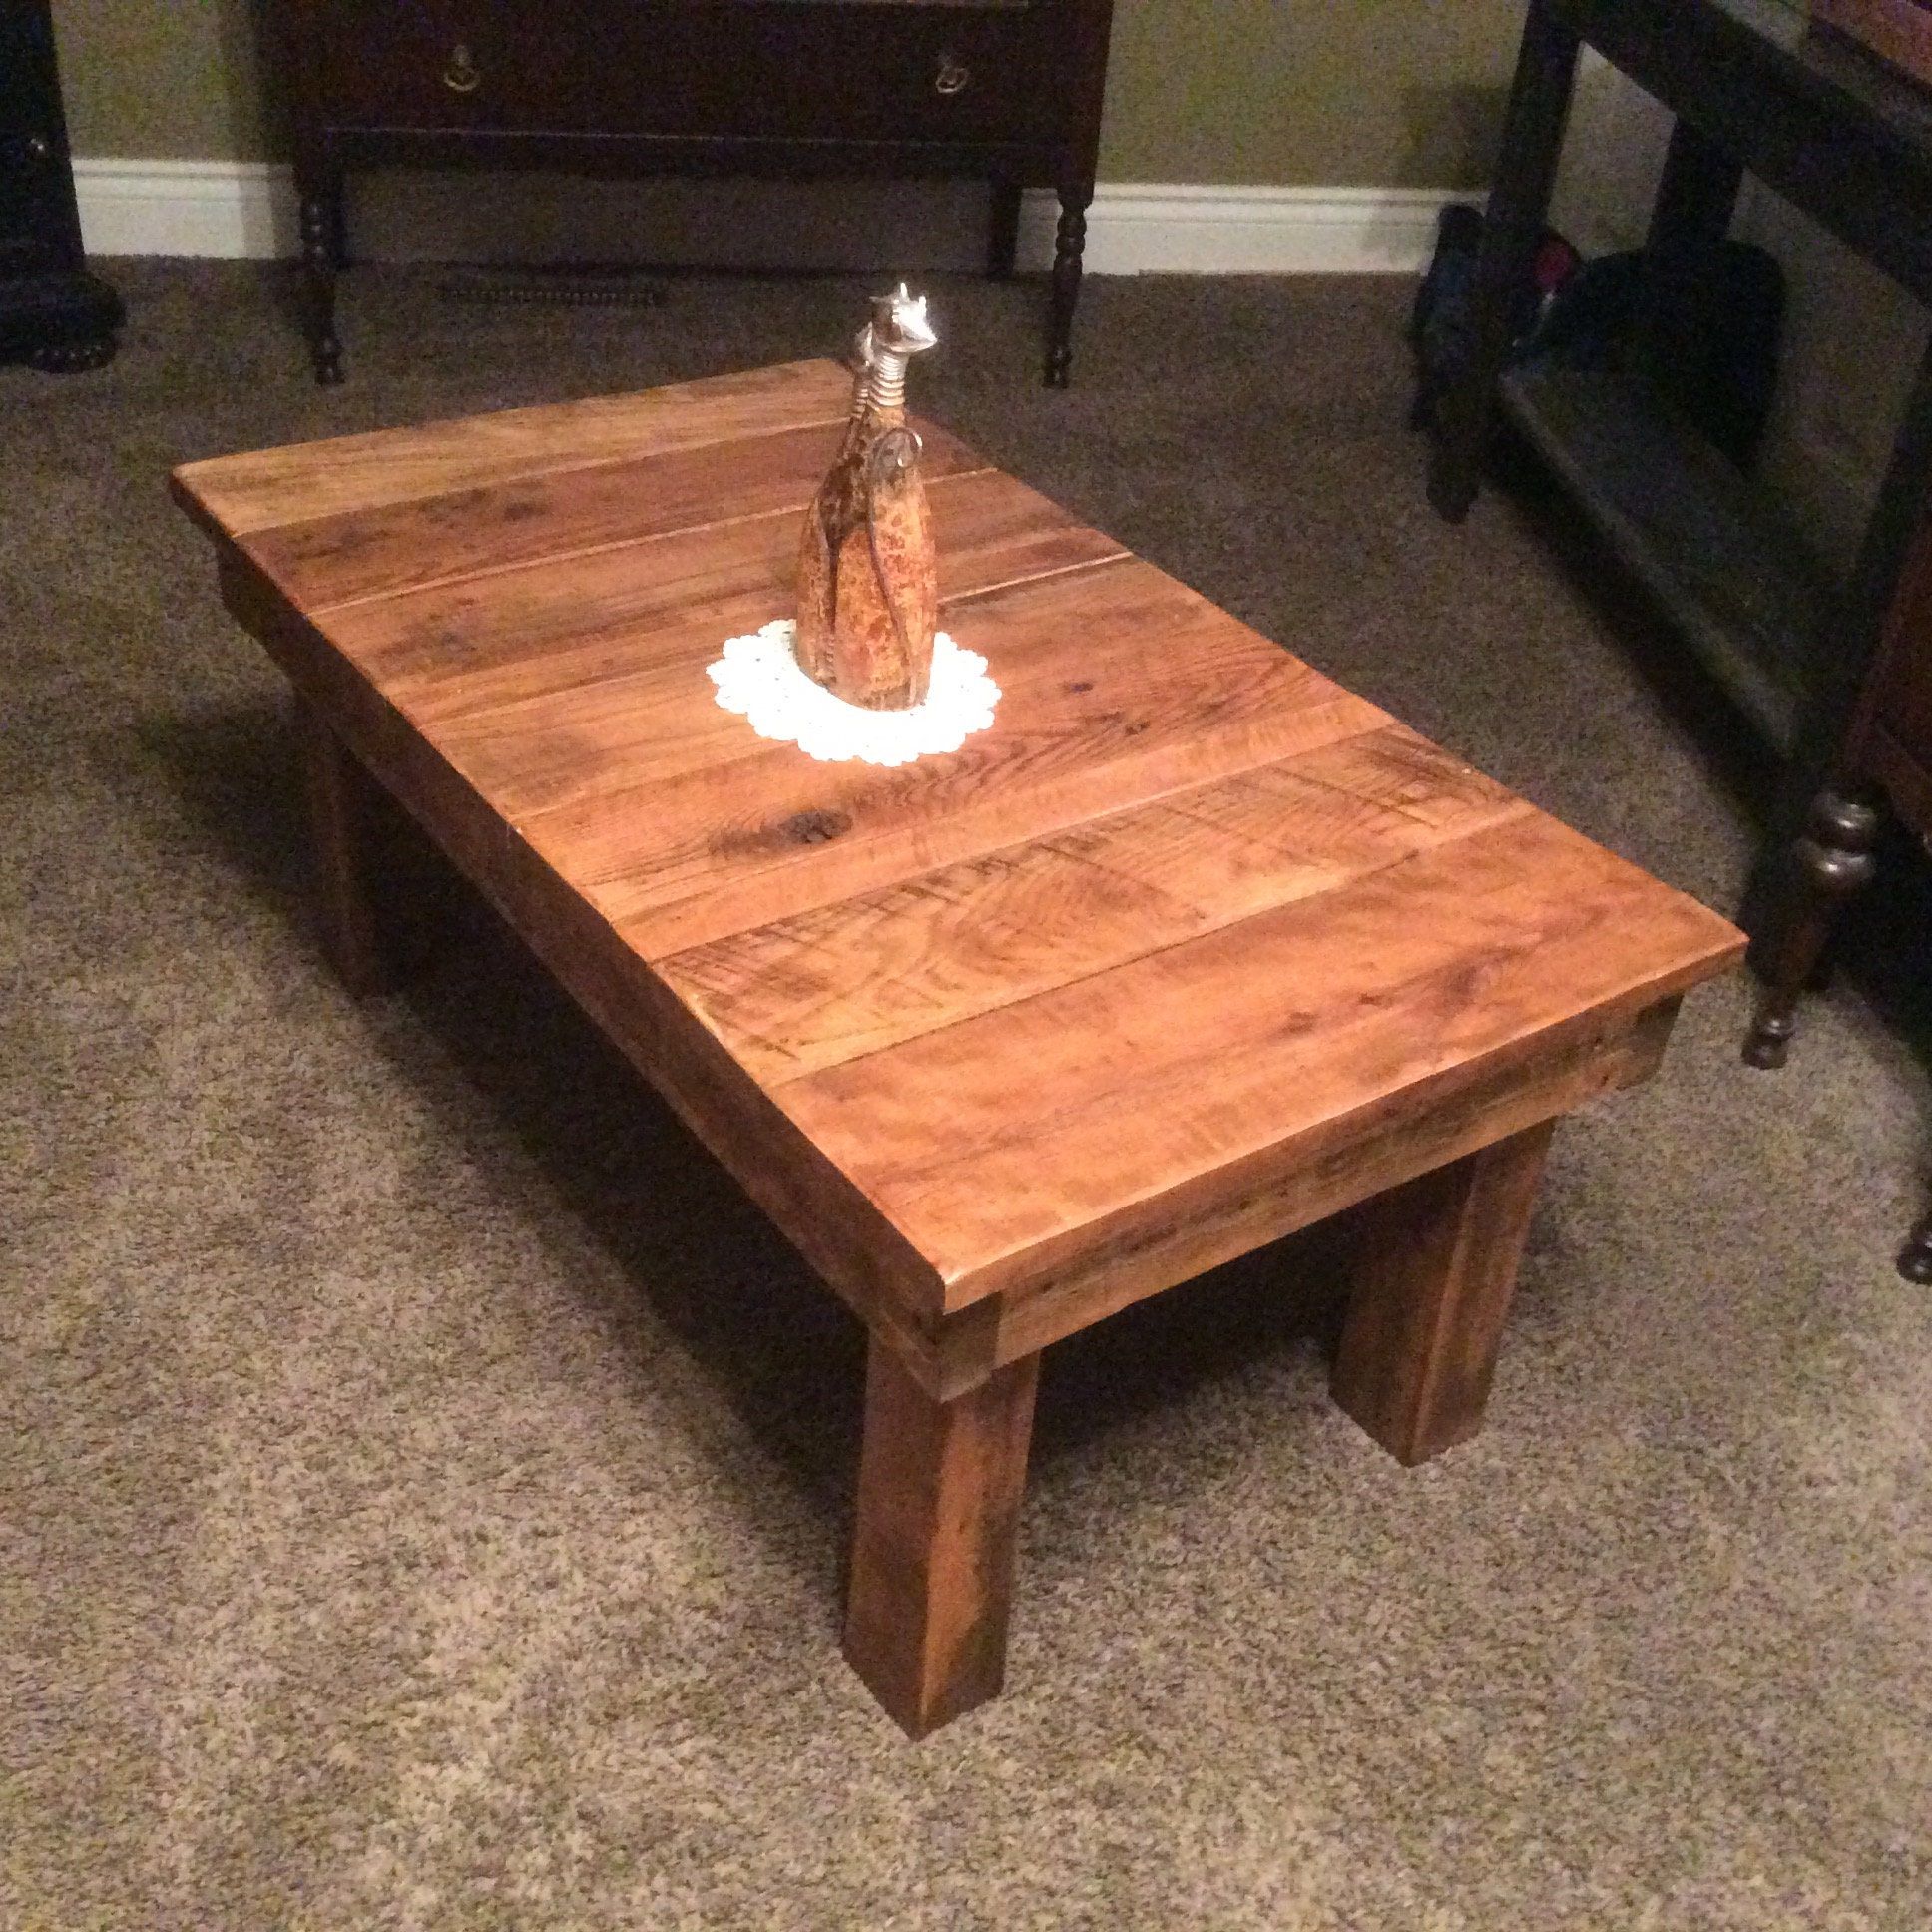 Widely Used Reclaimed Wood Rustic Coffee Table For Reclaimed Wood Coffee Tables (View 20 of 20)